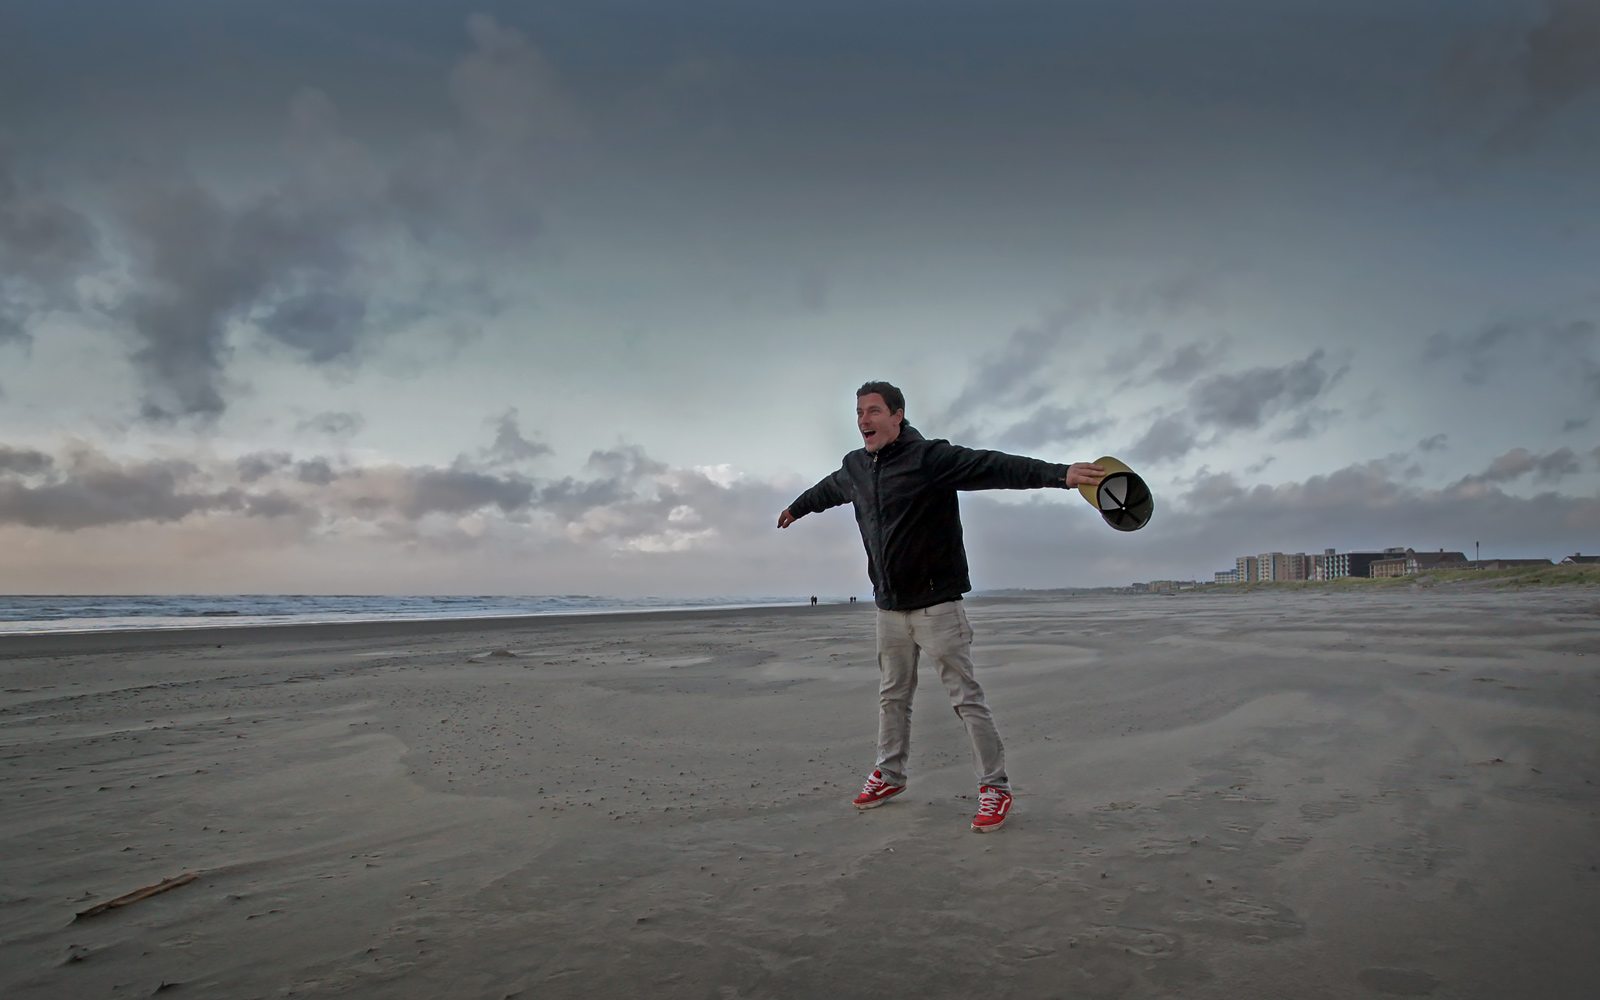 Trying to take flight during a wind storm on the beach in Seaside, Oregon.